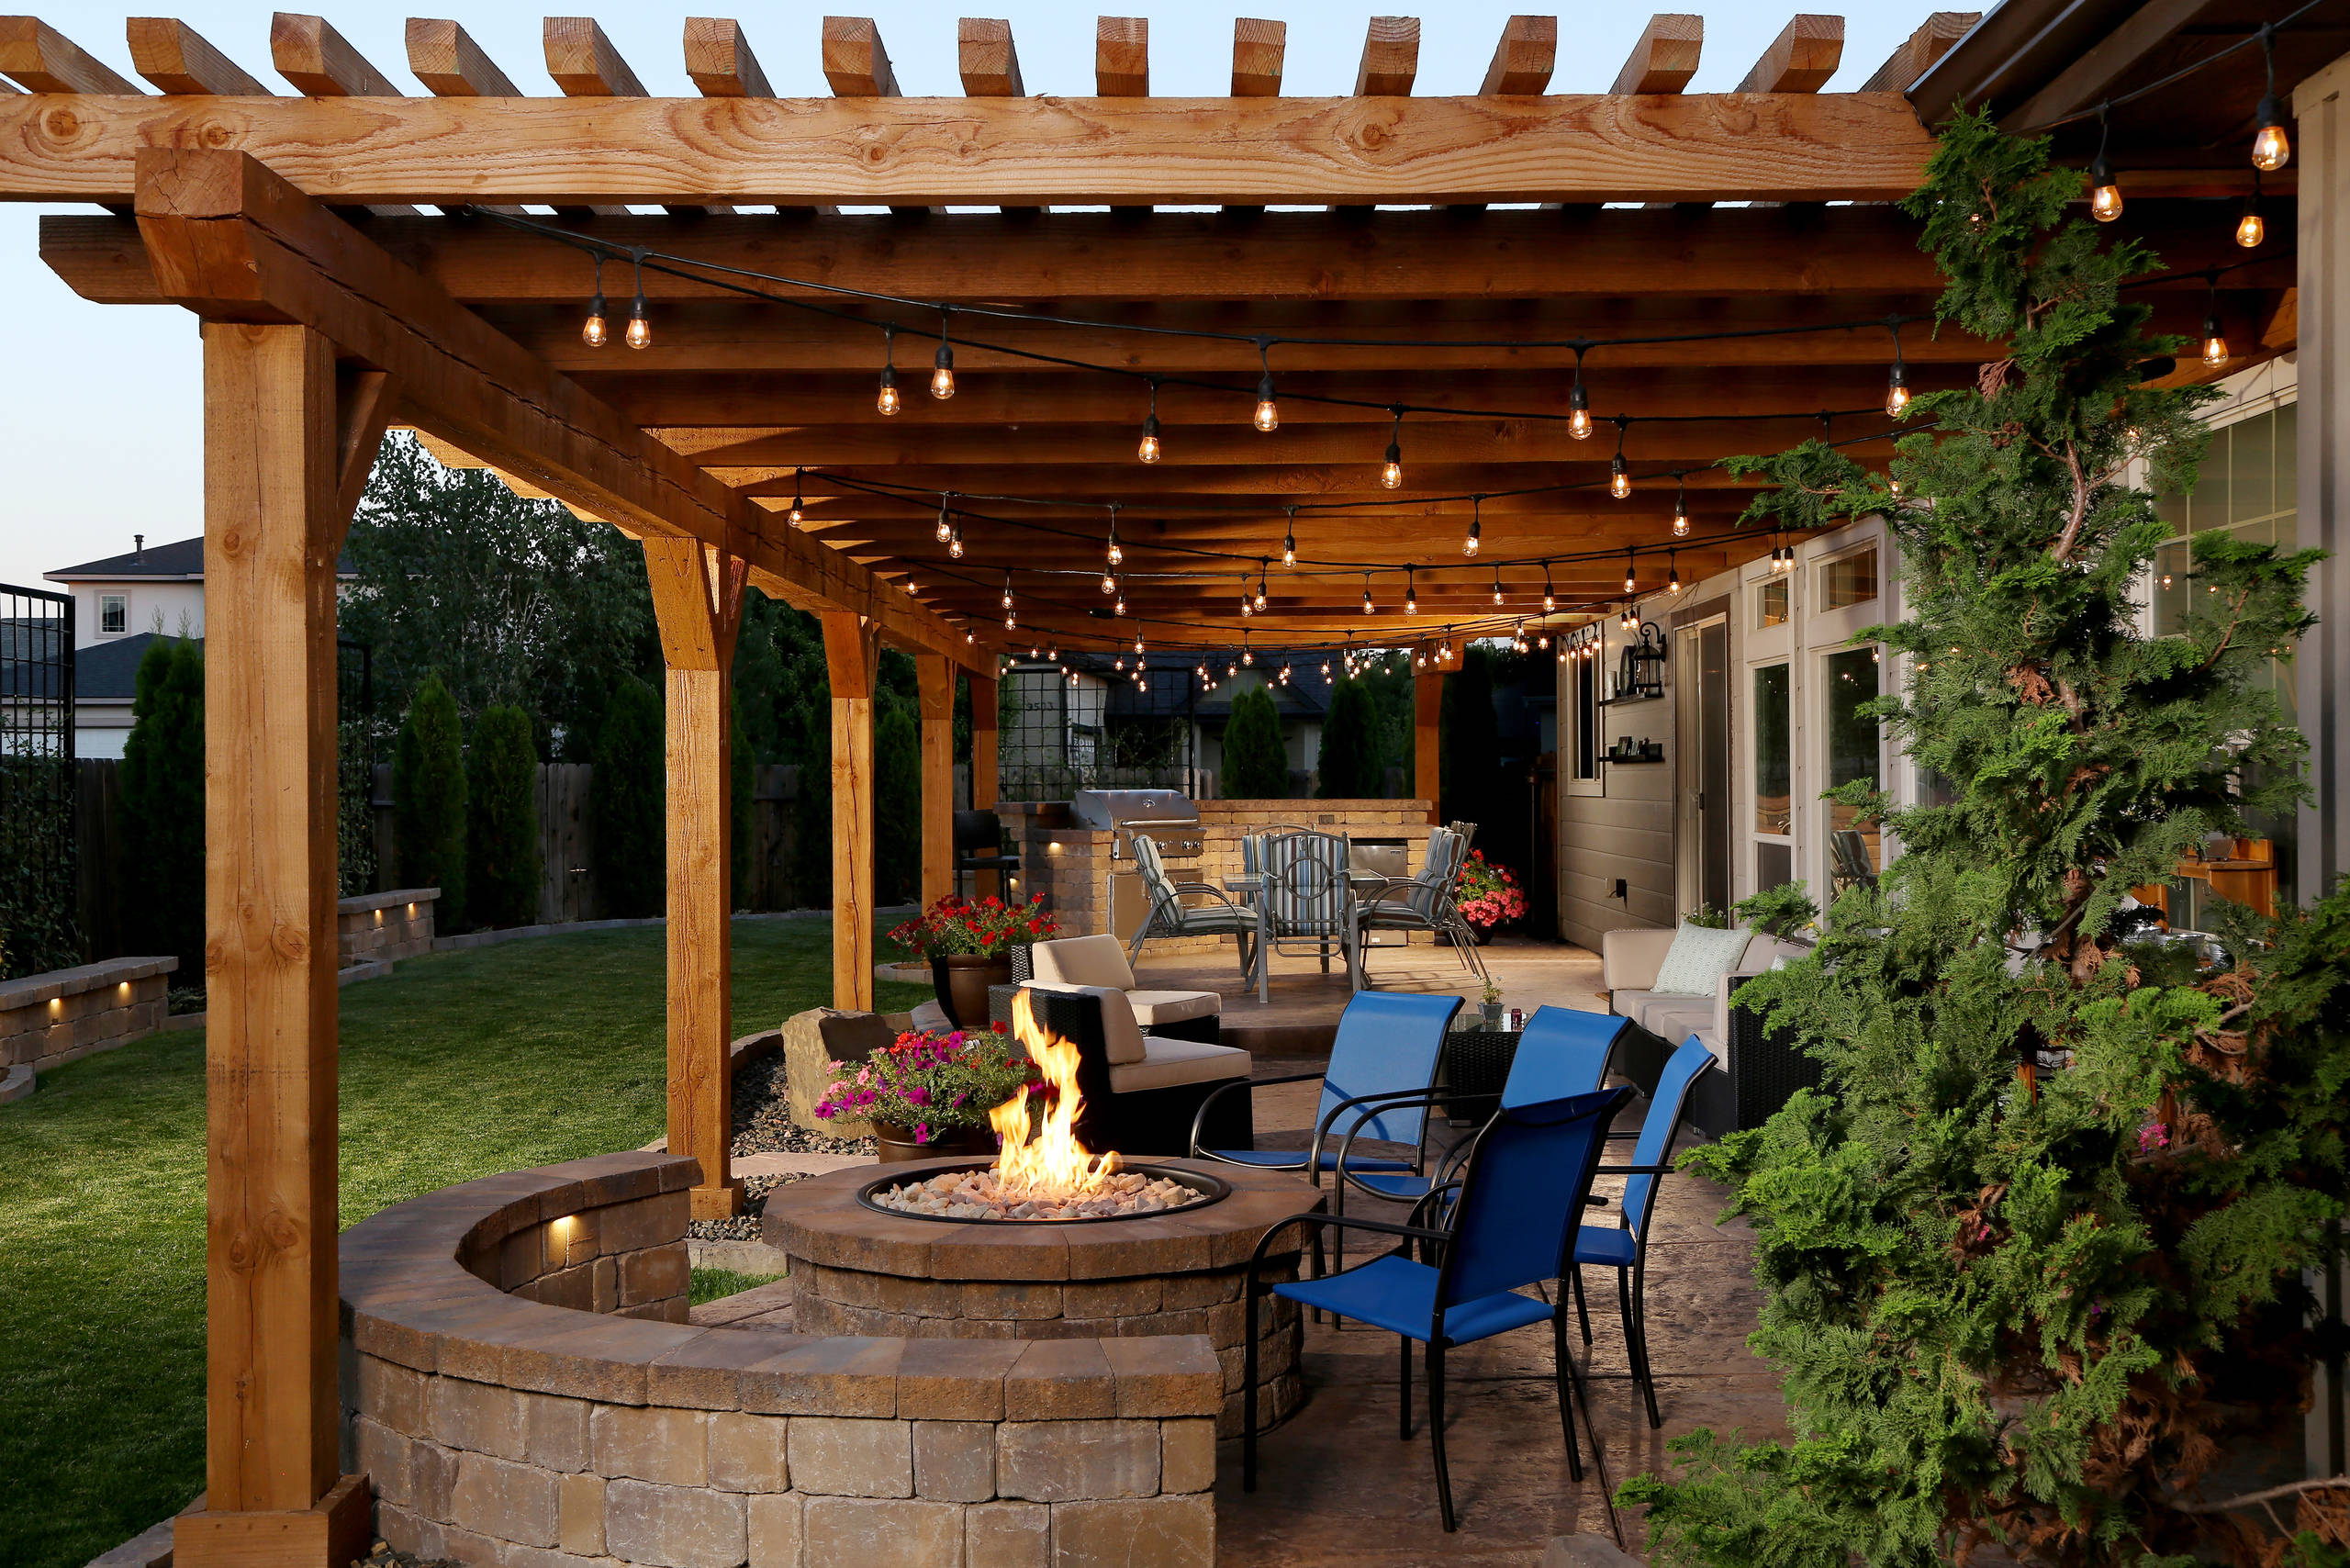 75 Beautiful Patio With A Pergola Pictures Ideas December 2021 Houzz